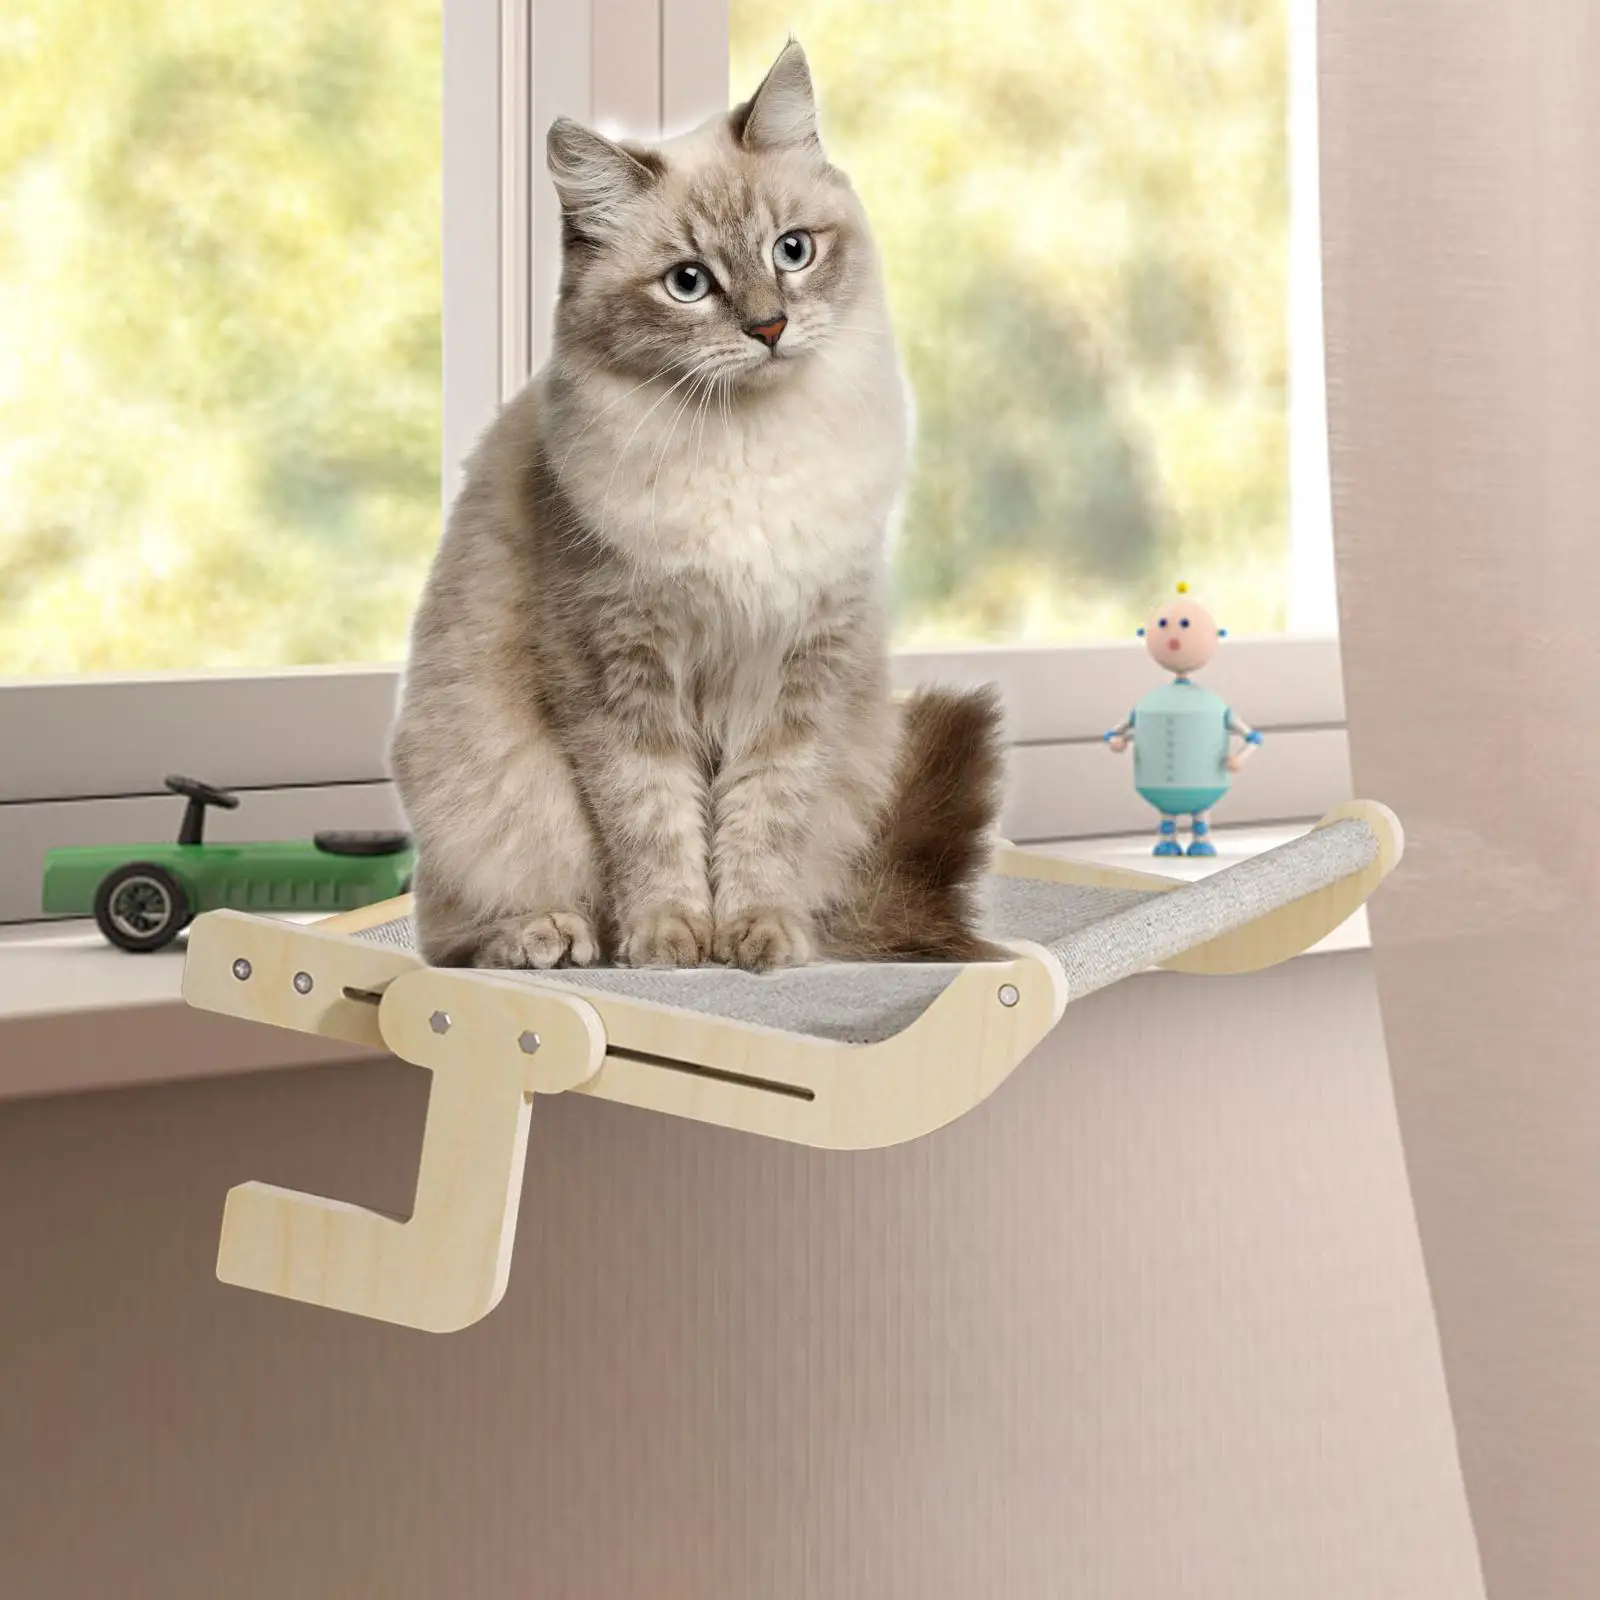 Premium Cat Window Perch Shelves Adjustable Space Saving Furniture Kitten Hammock Bed Seat for Lounging Playing Pets Indoor Home